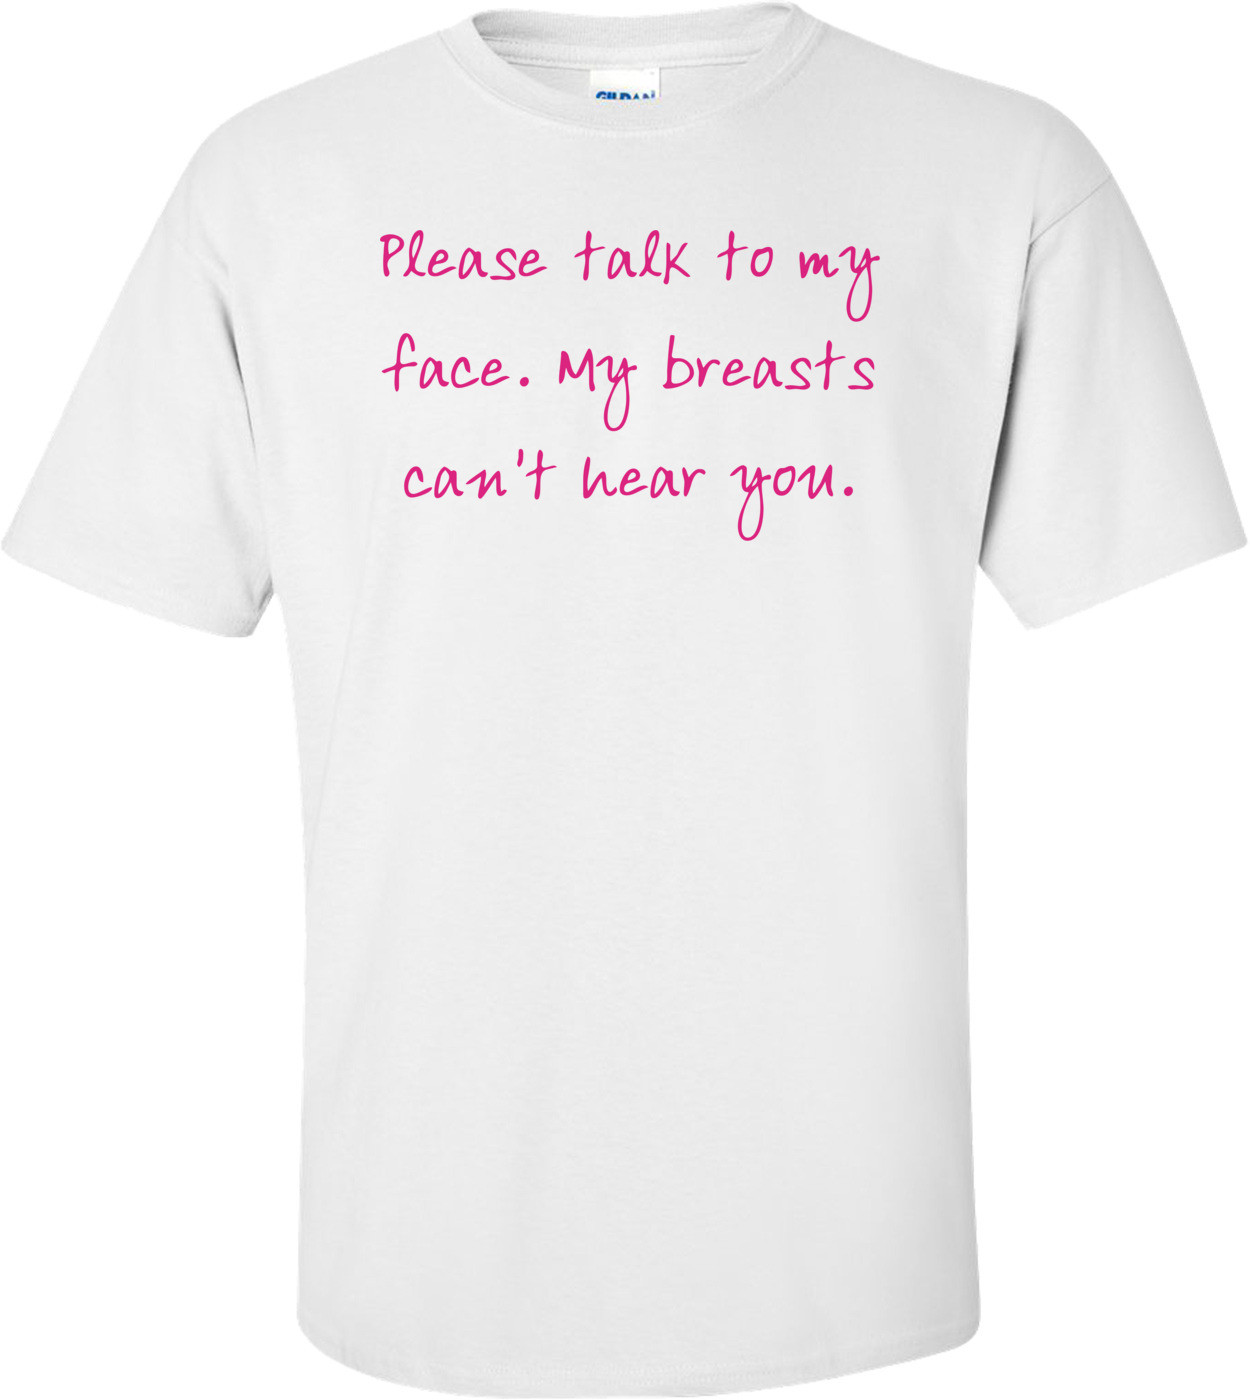 Please Talk To My Face. My Breasts Can't Hear You. Shirt